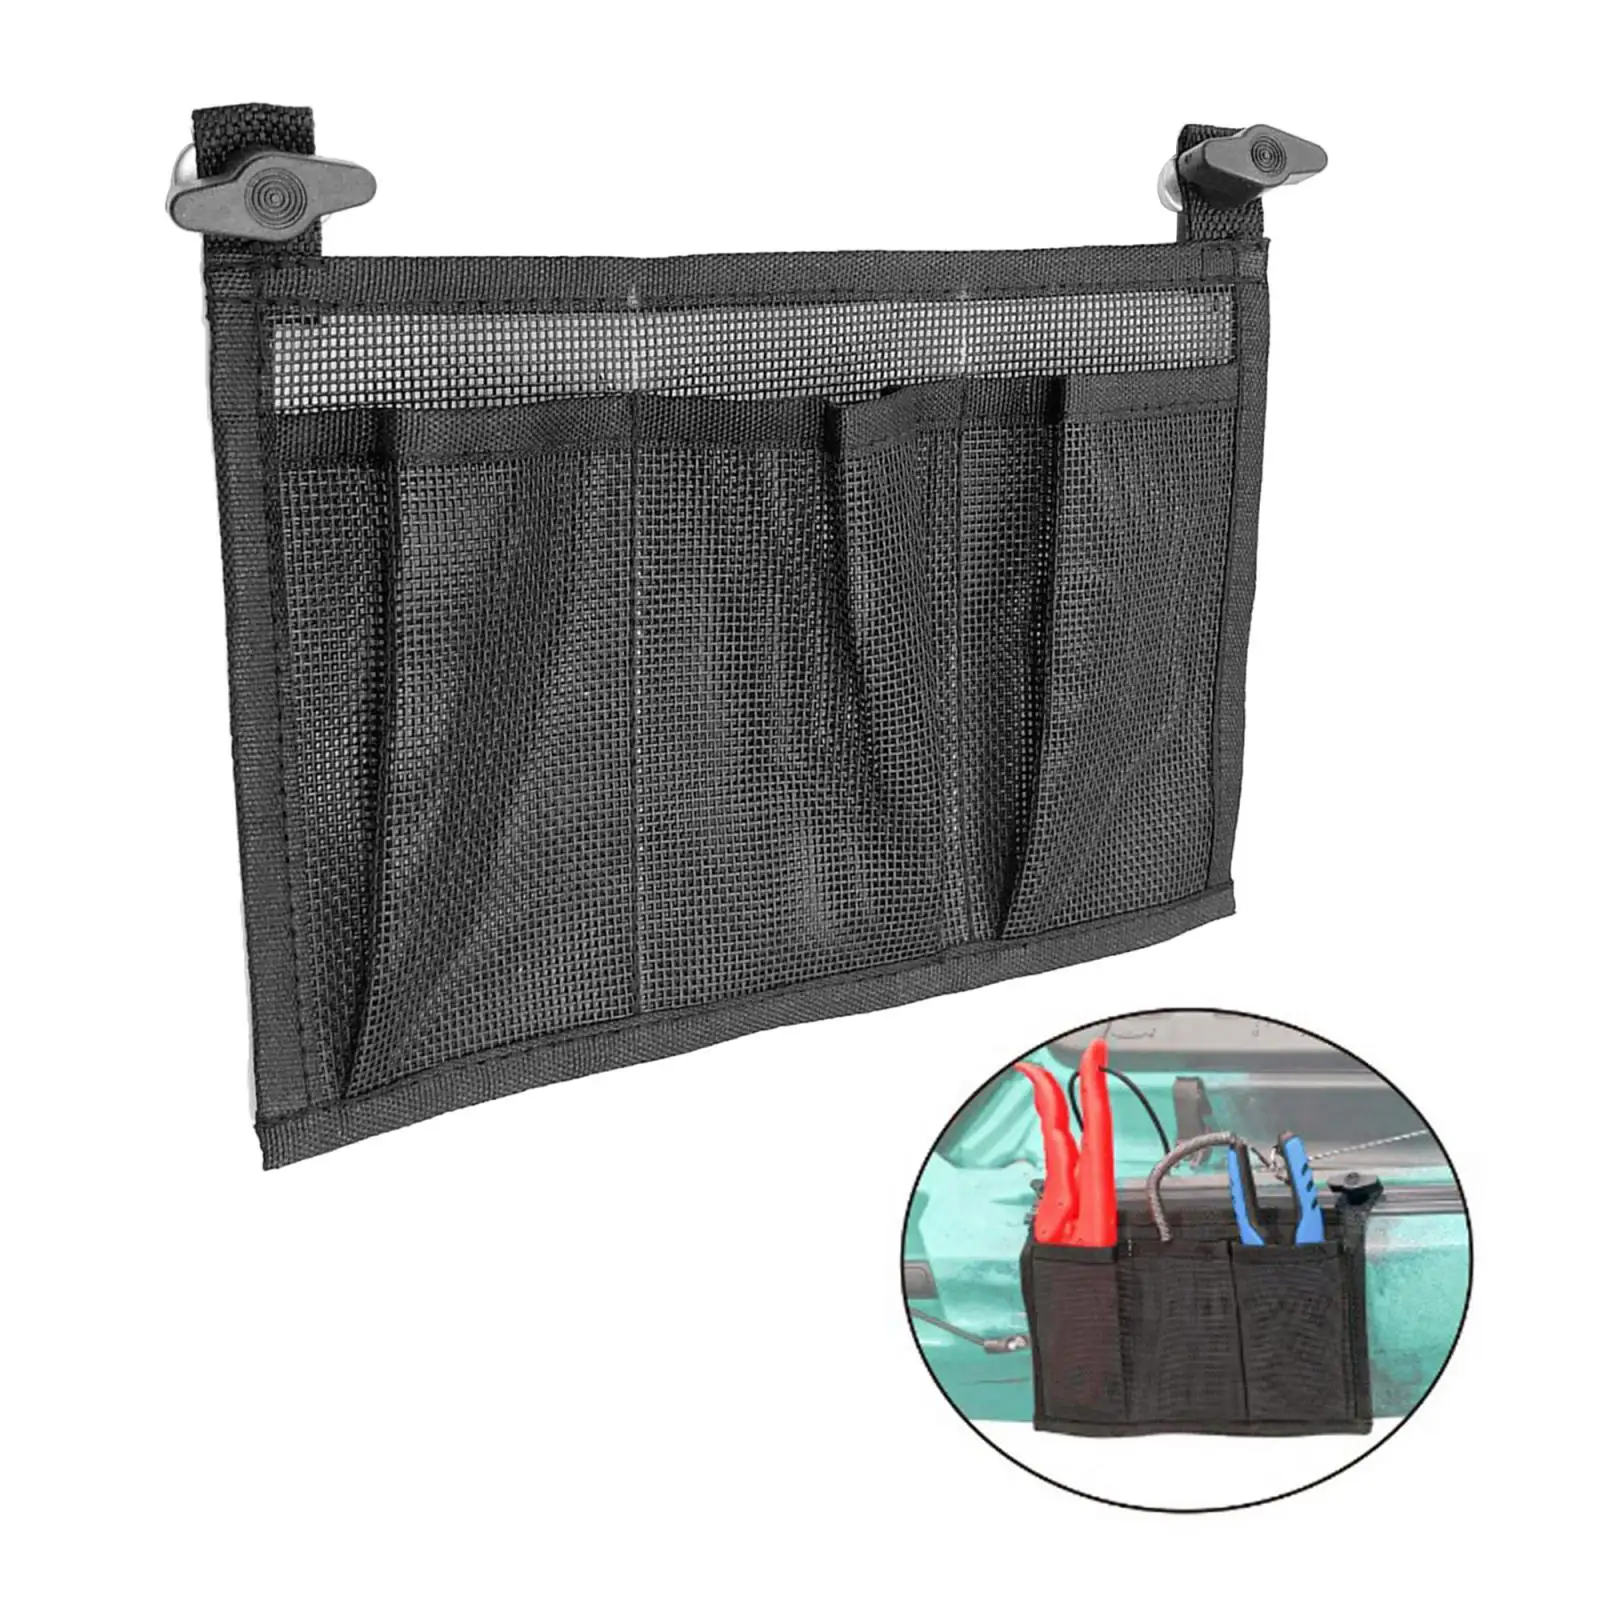 Nylon Mesh Pouch, Drawstring Bags for Travel, Camping Hammock, Kayak, Fishng Boat Tools Tackles Gear Storage Side Pouch